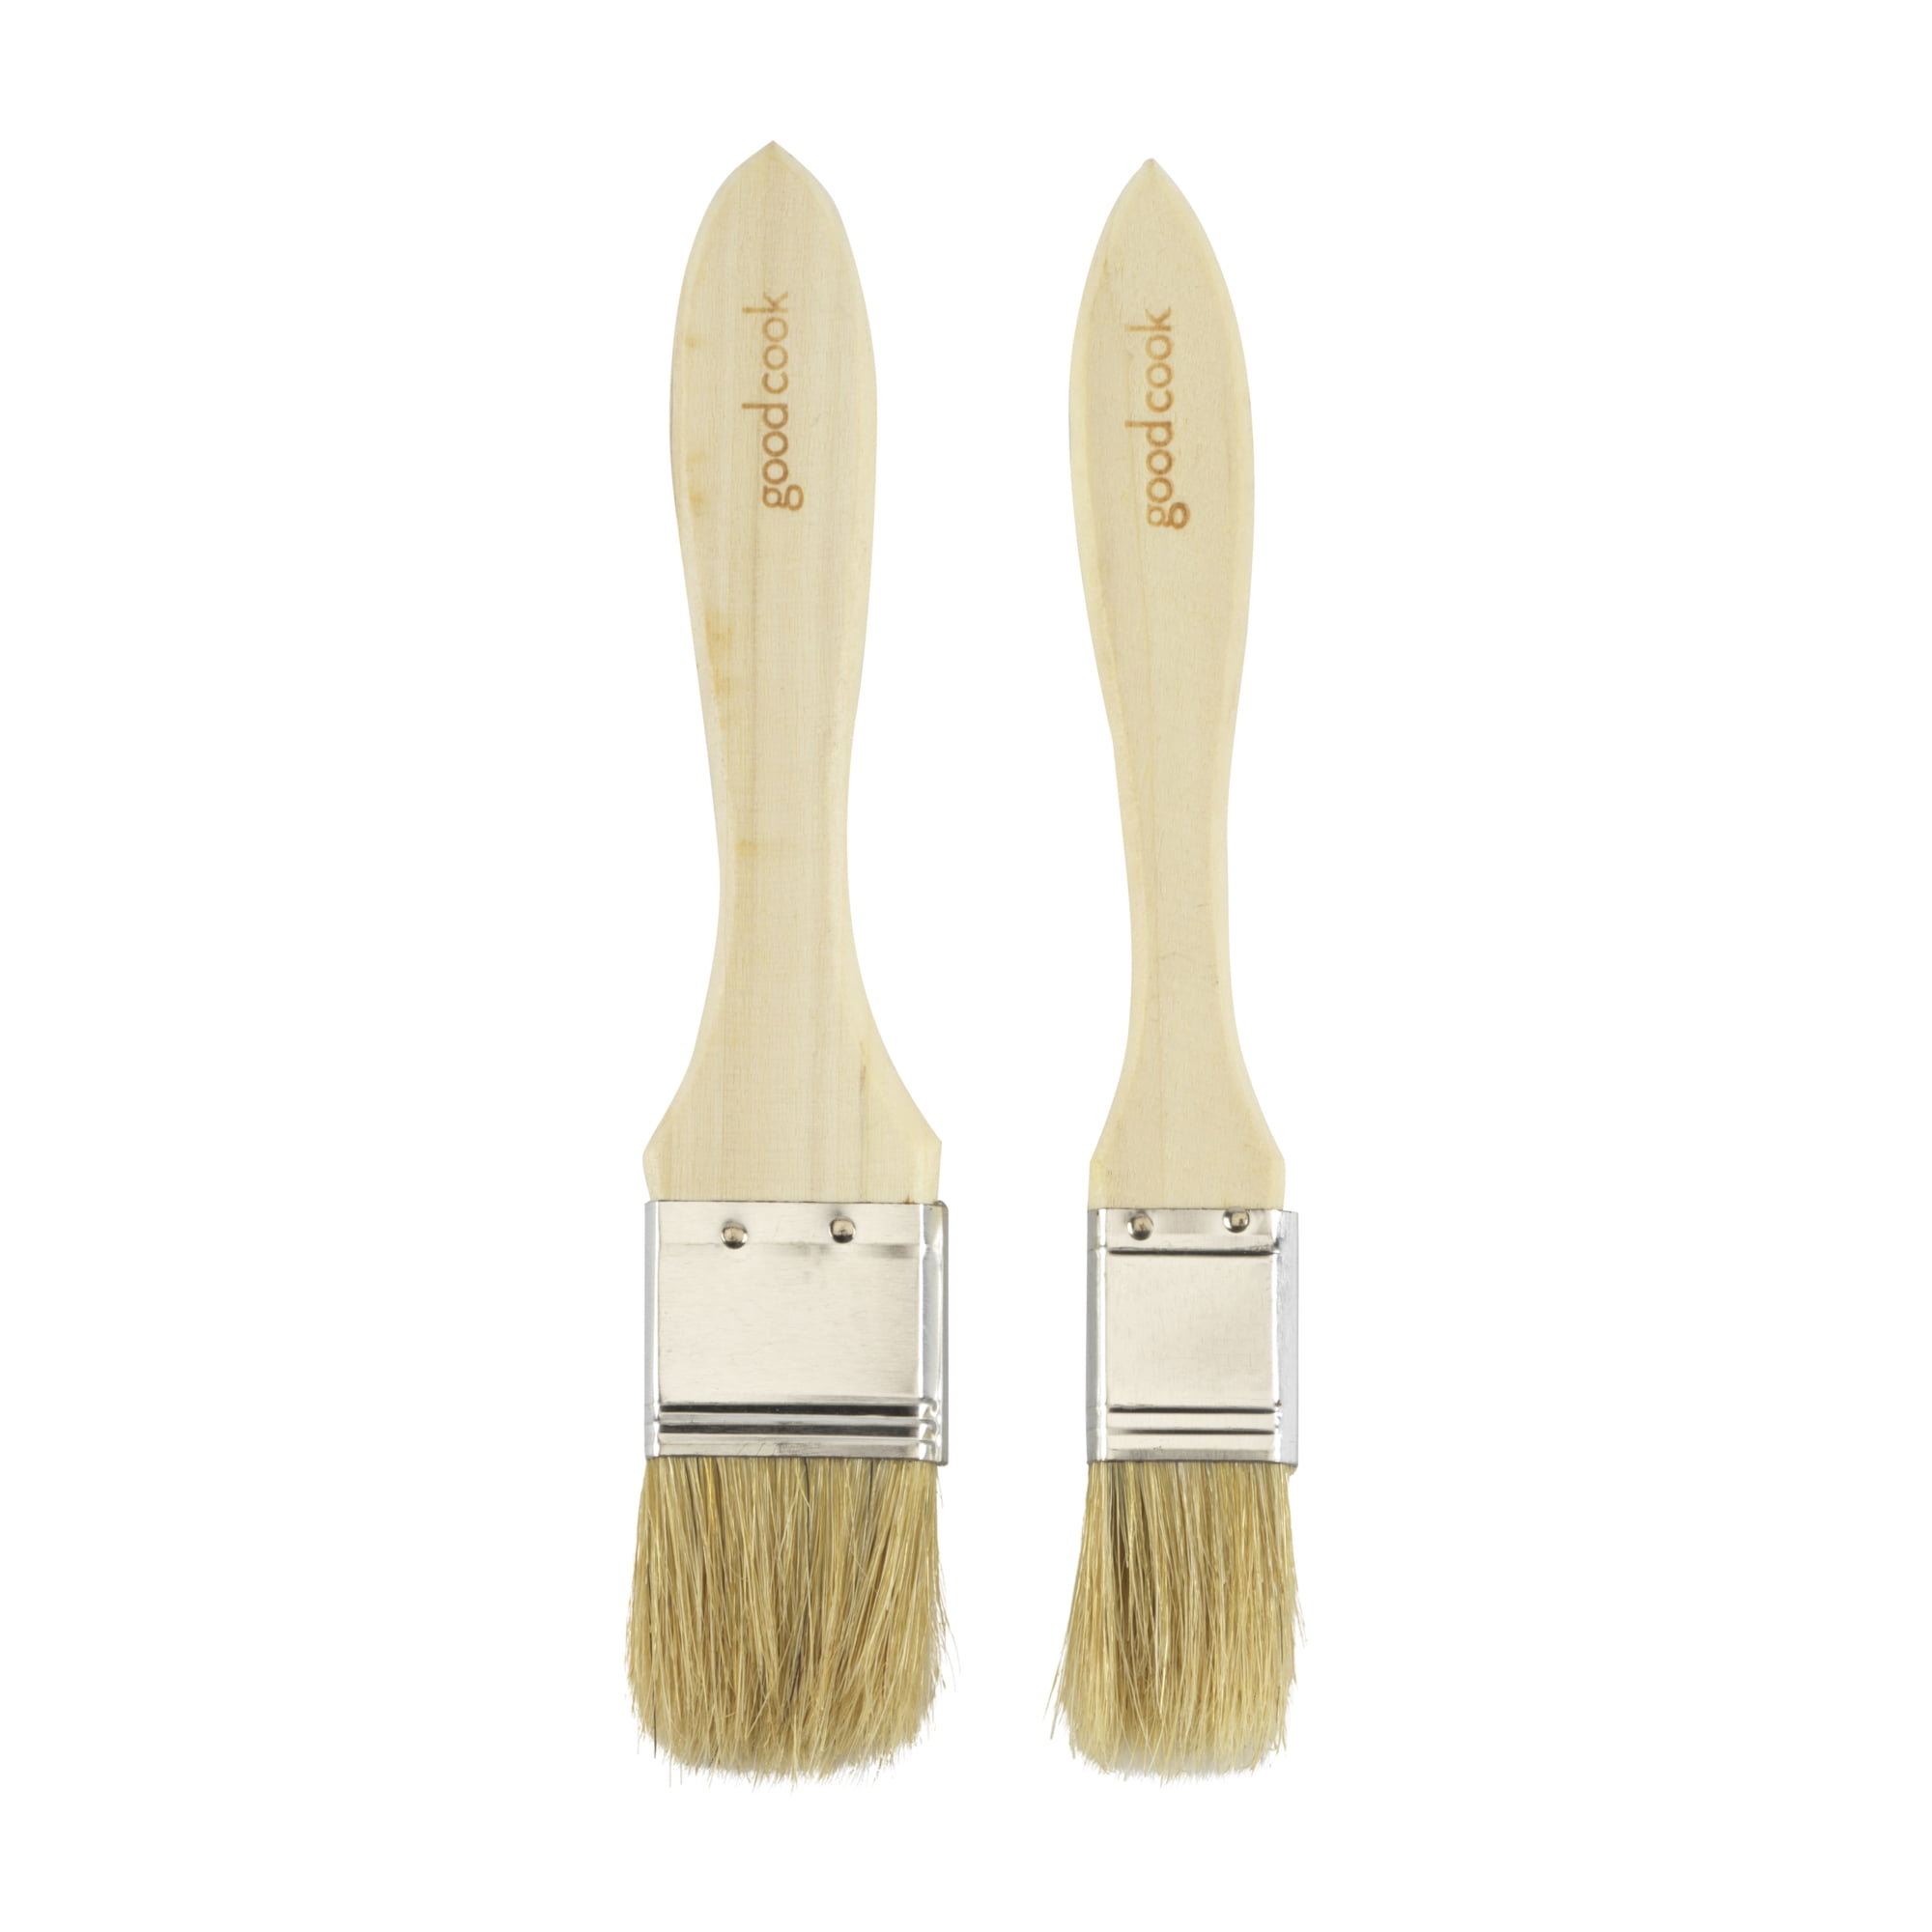 GrillPro Economy Basting Brushes. Two Brushes, 7.5-in Long.